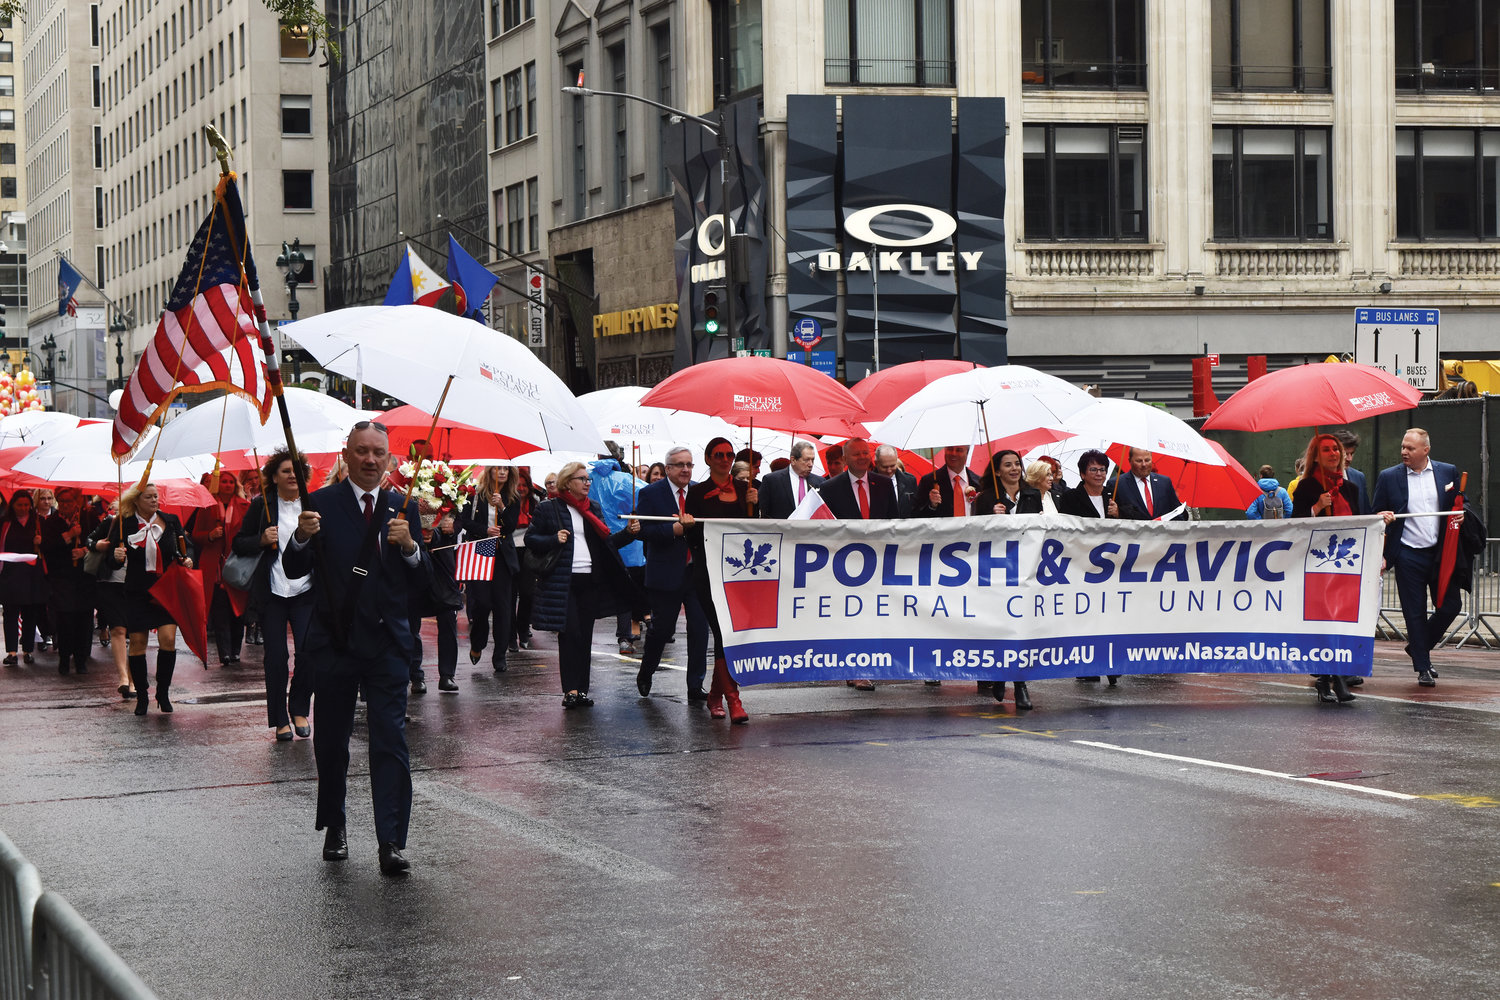 The 85th annual Pulaski Day Parade was held Oct. 2 in Manhattan. Auxiliary Bishop Witold Mroziewski of the Diocese of Brooklyn, served as celebrant at St. Patrick’s Cathedral. The parade, traditionally held on the first Sunday of October, dates back to 1937 when New York’s Polish-American community honored Polish nobleman and American Revolutionary War hero Gen. Casimir Pulaski.